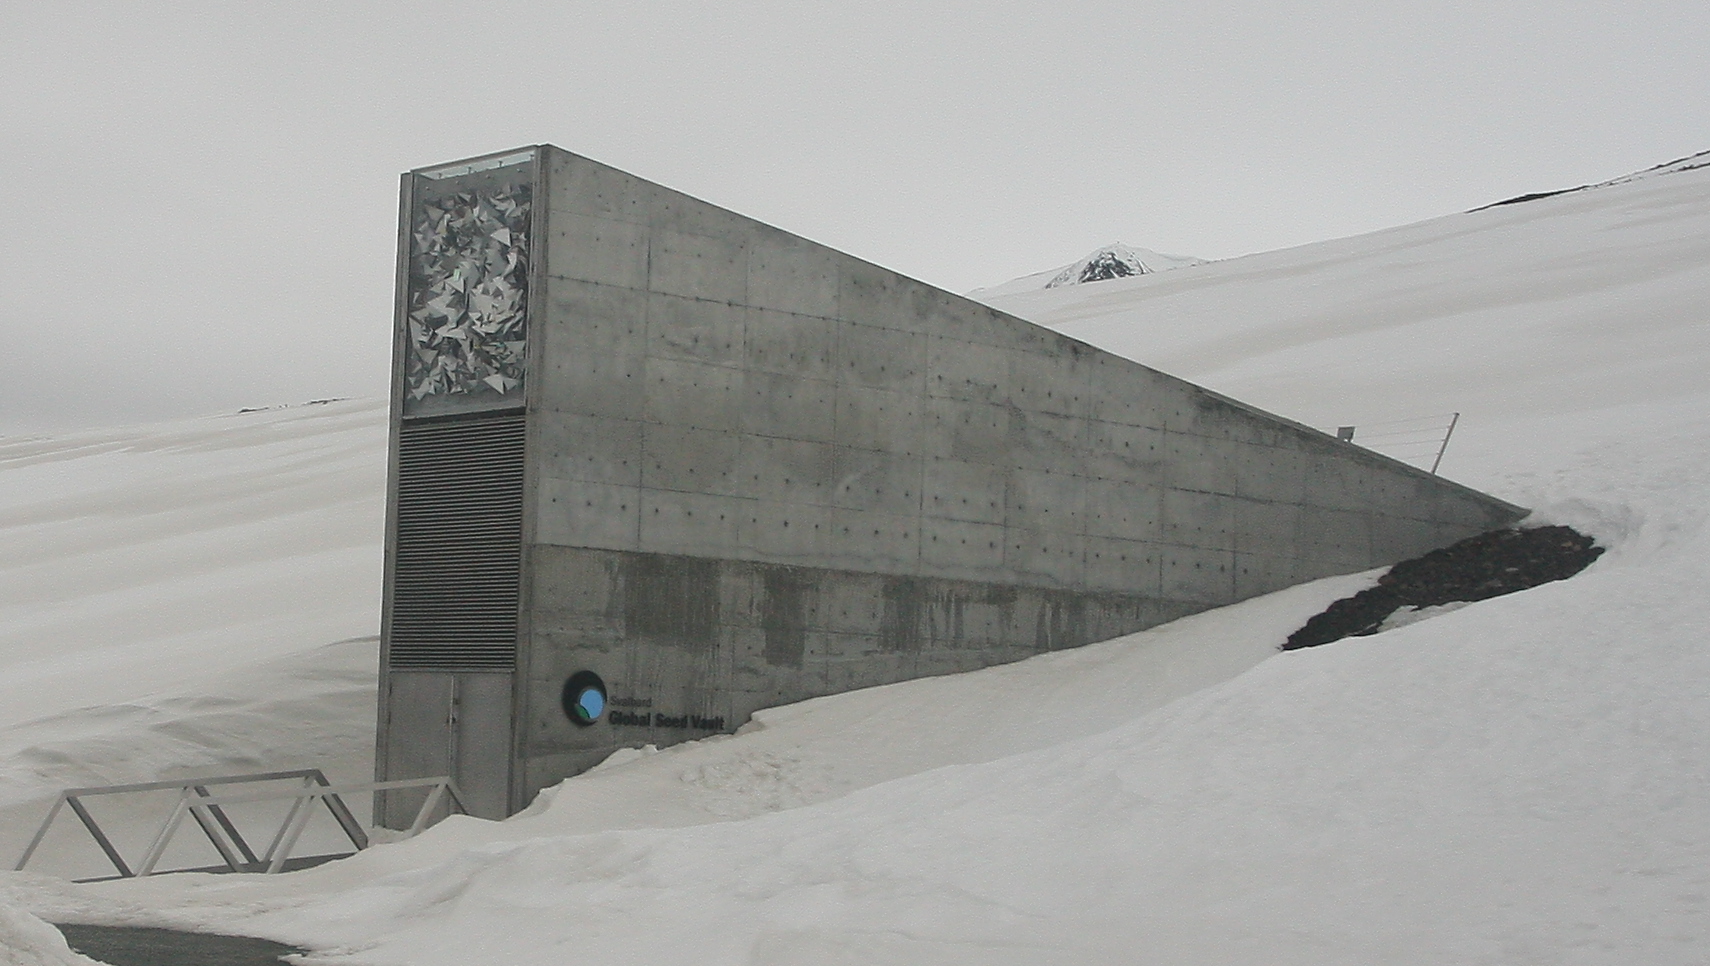 A narrow rectangular building is partially buried in a snowy hillside, keeping the seeds inside the vault cool.